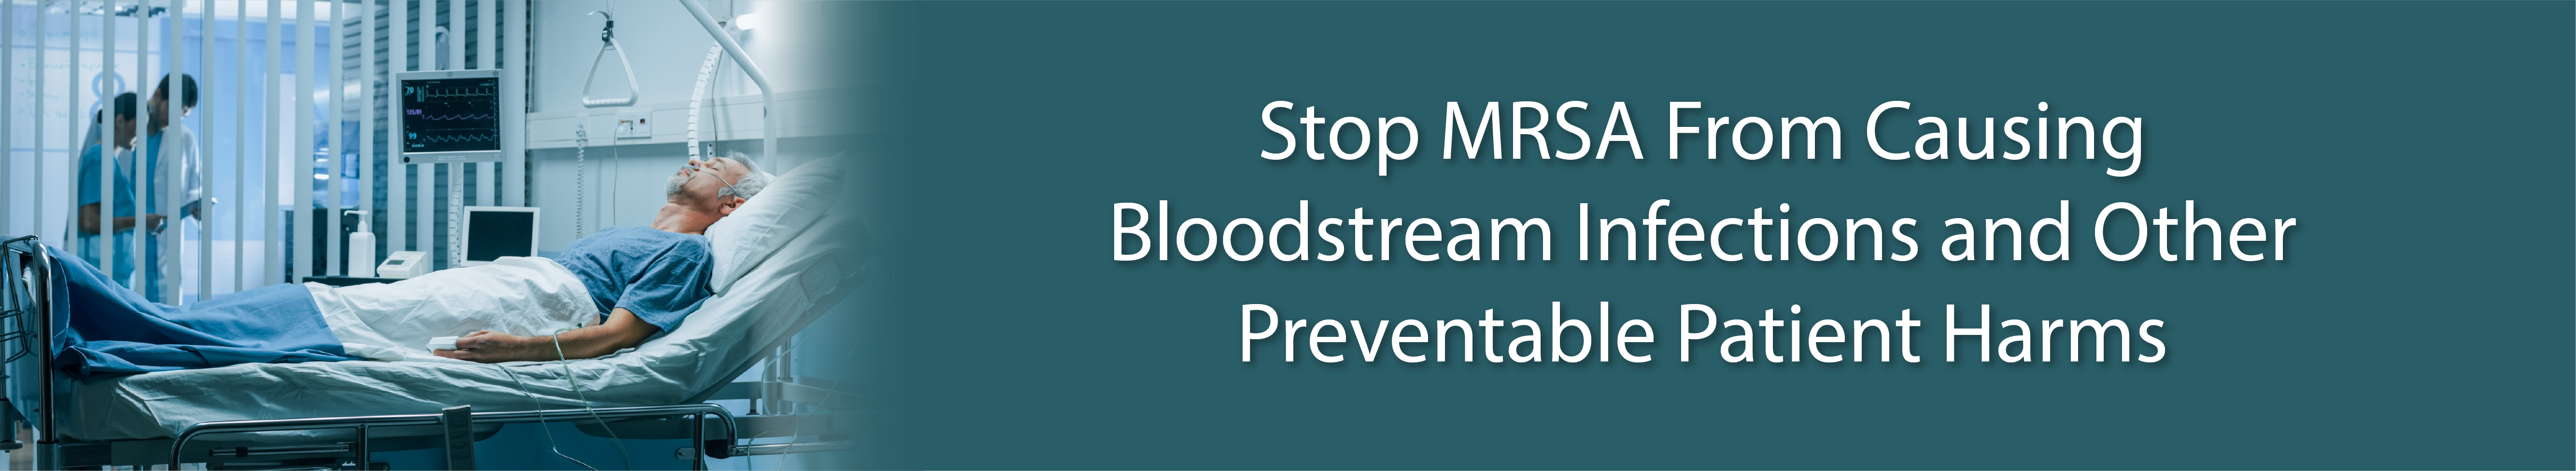 Stop MRSA From Causing Infections banner